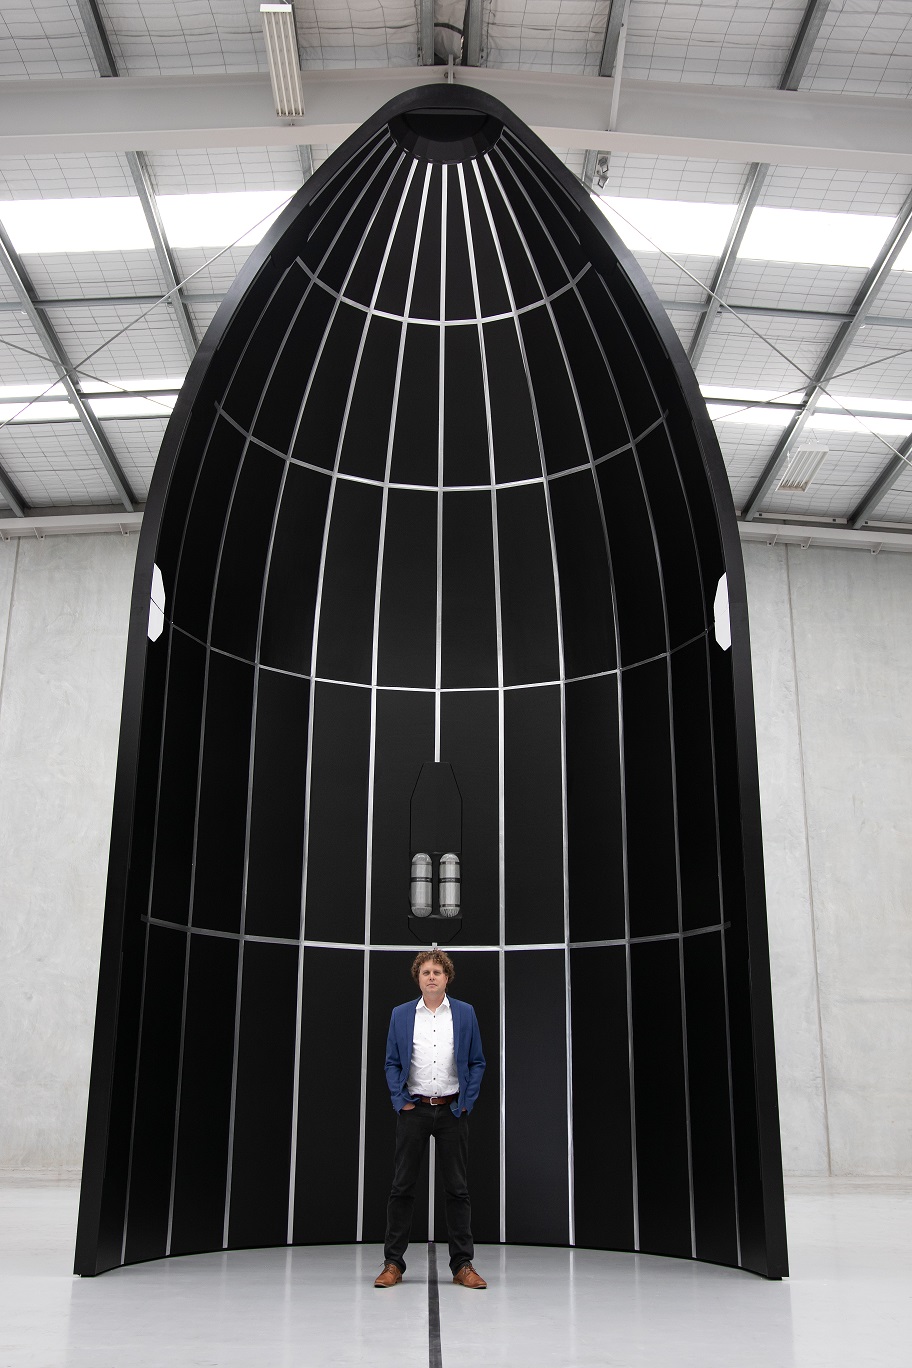 Rocket Lab Wins $24m U.S. Space Force Contract to Develop Neutron Upper Stage